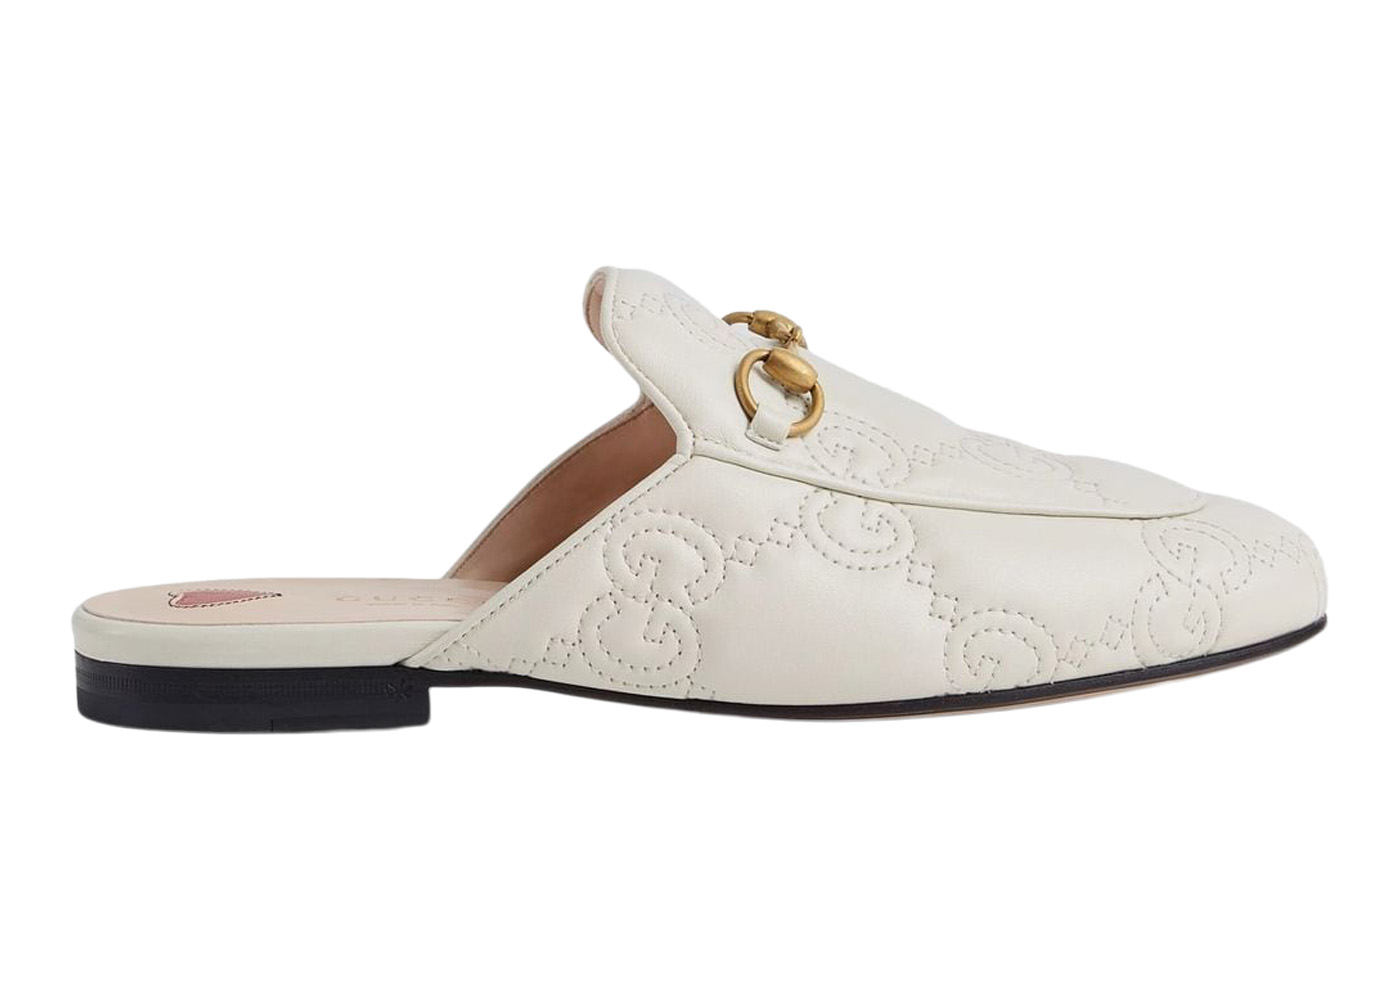 Gucci Princetown Slipper White Embossed Leather